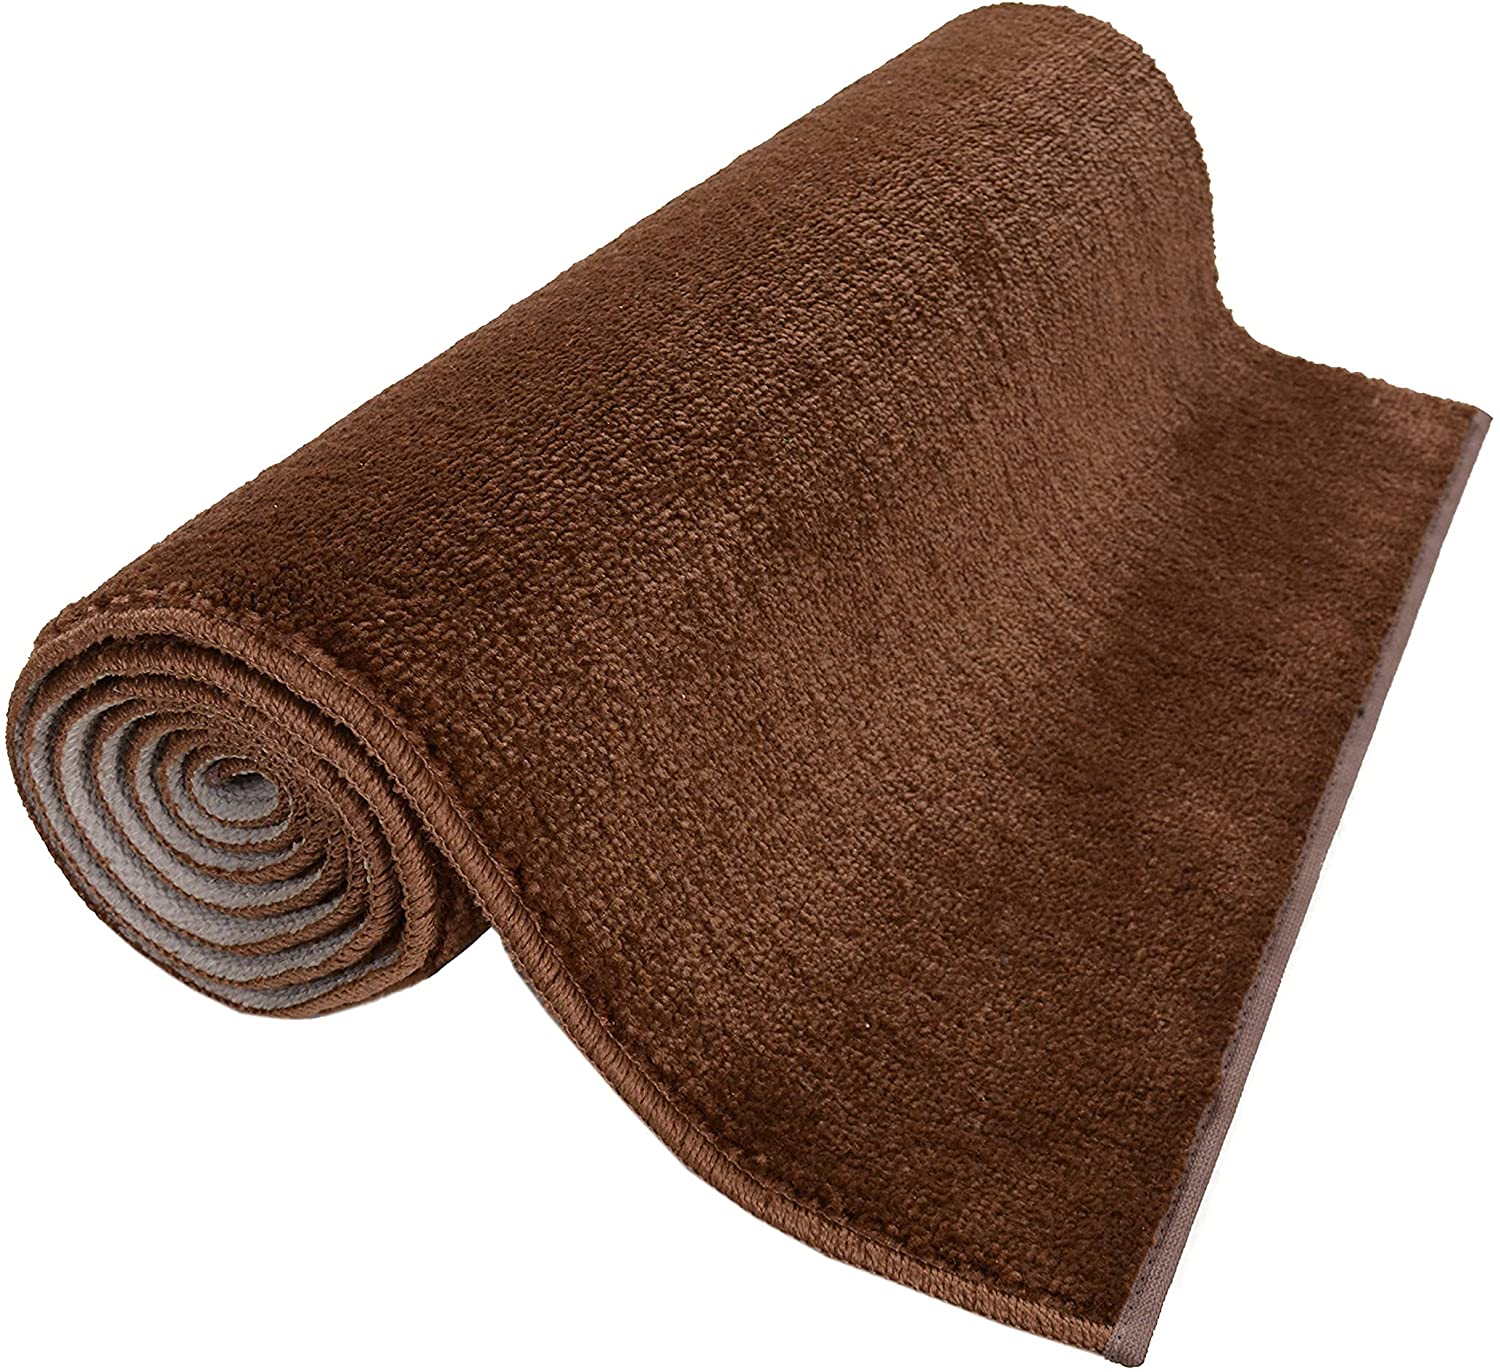 Machine Washable Custom Size Runner Rug Copper Brown Color Skid Resistant Rug Runner Customize Up to 50 Feet and 36 Inch Width Runner Rug-6